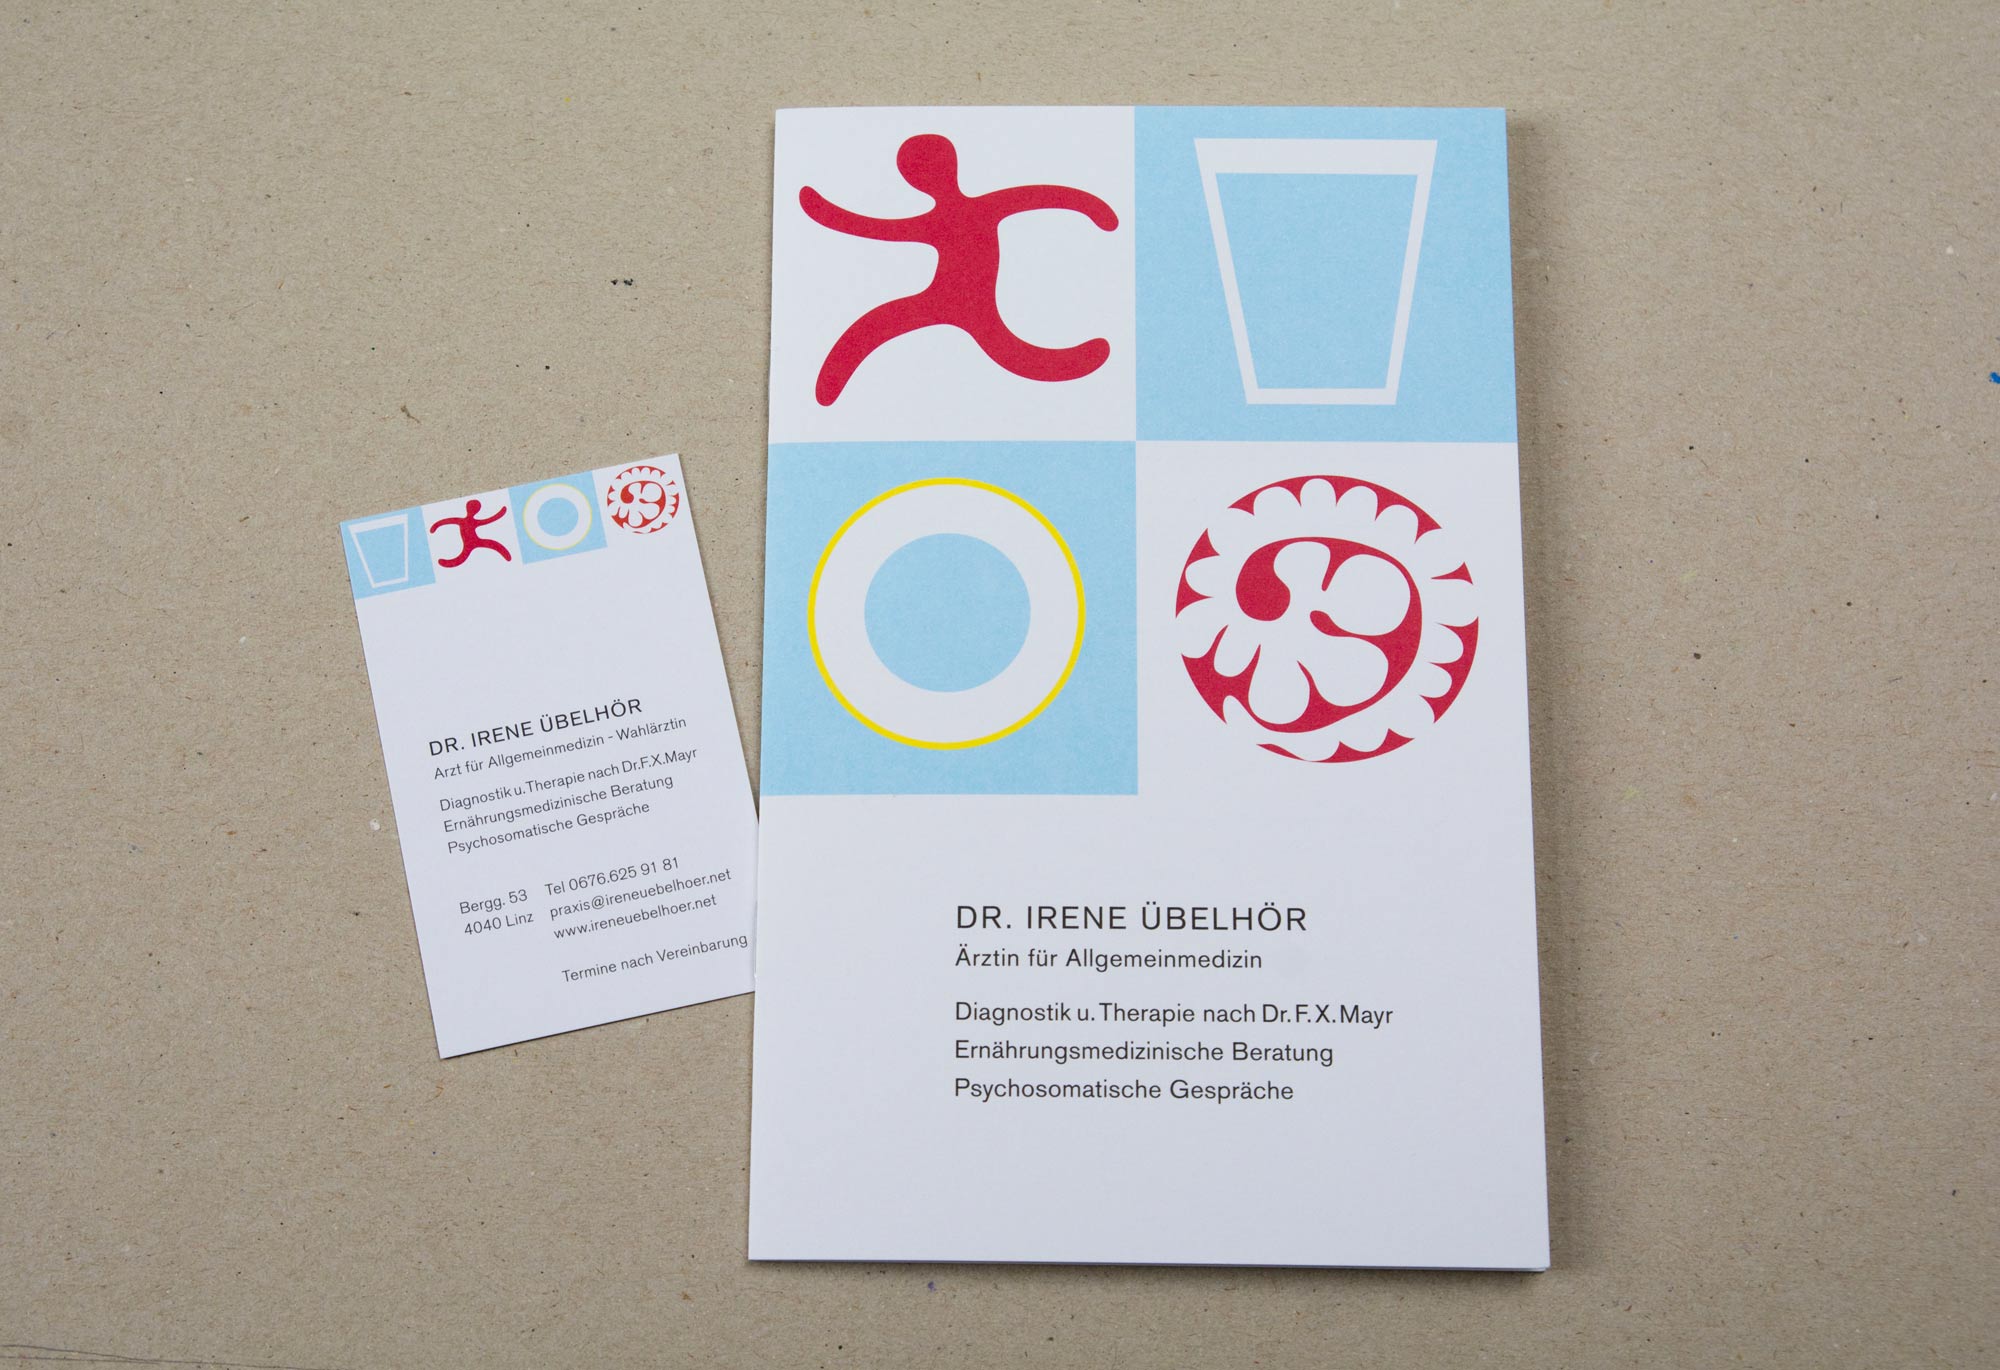 Folder and business card. 4 graphical images on top. Block of text underneath.